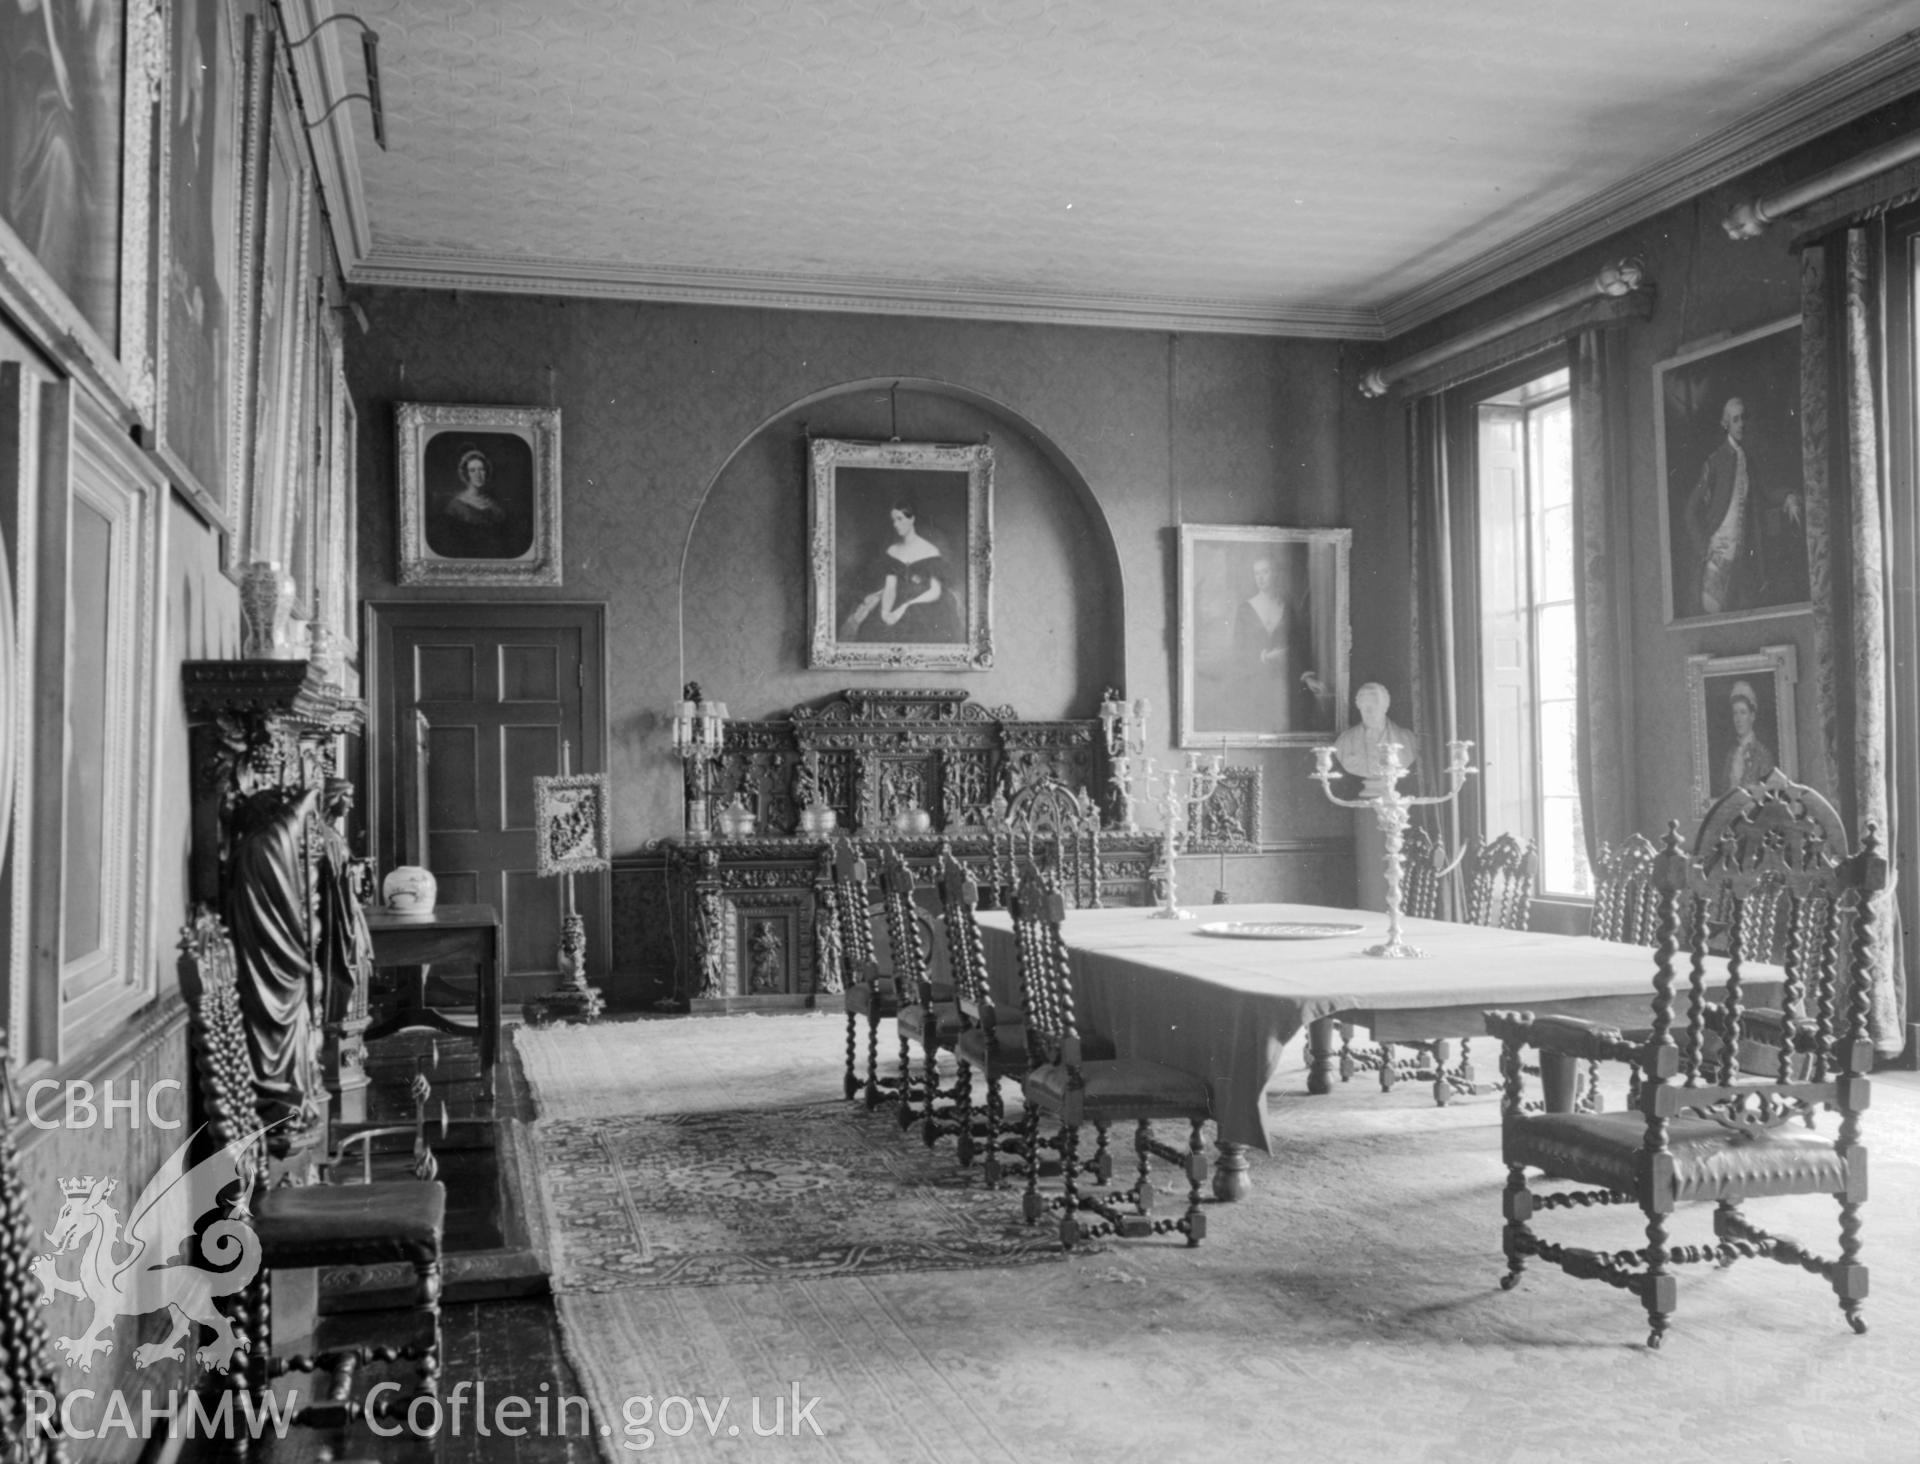 An easterly view of the dining room.